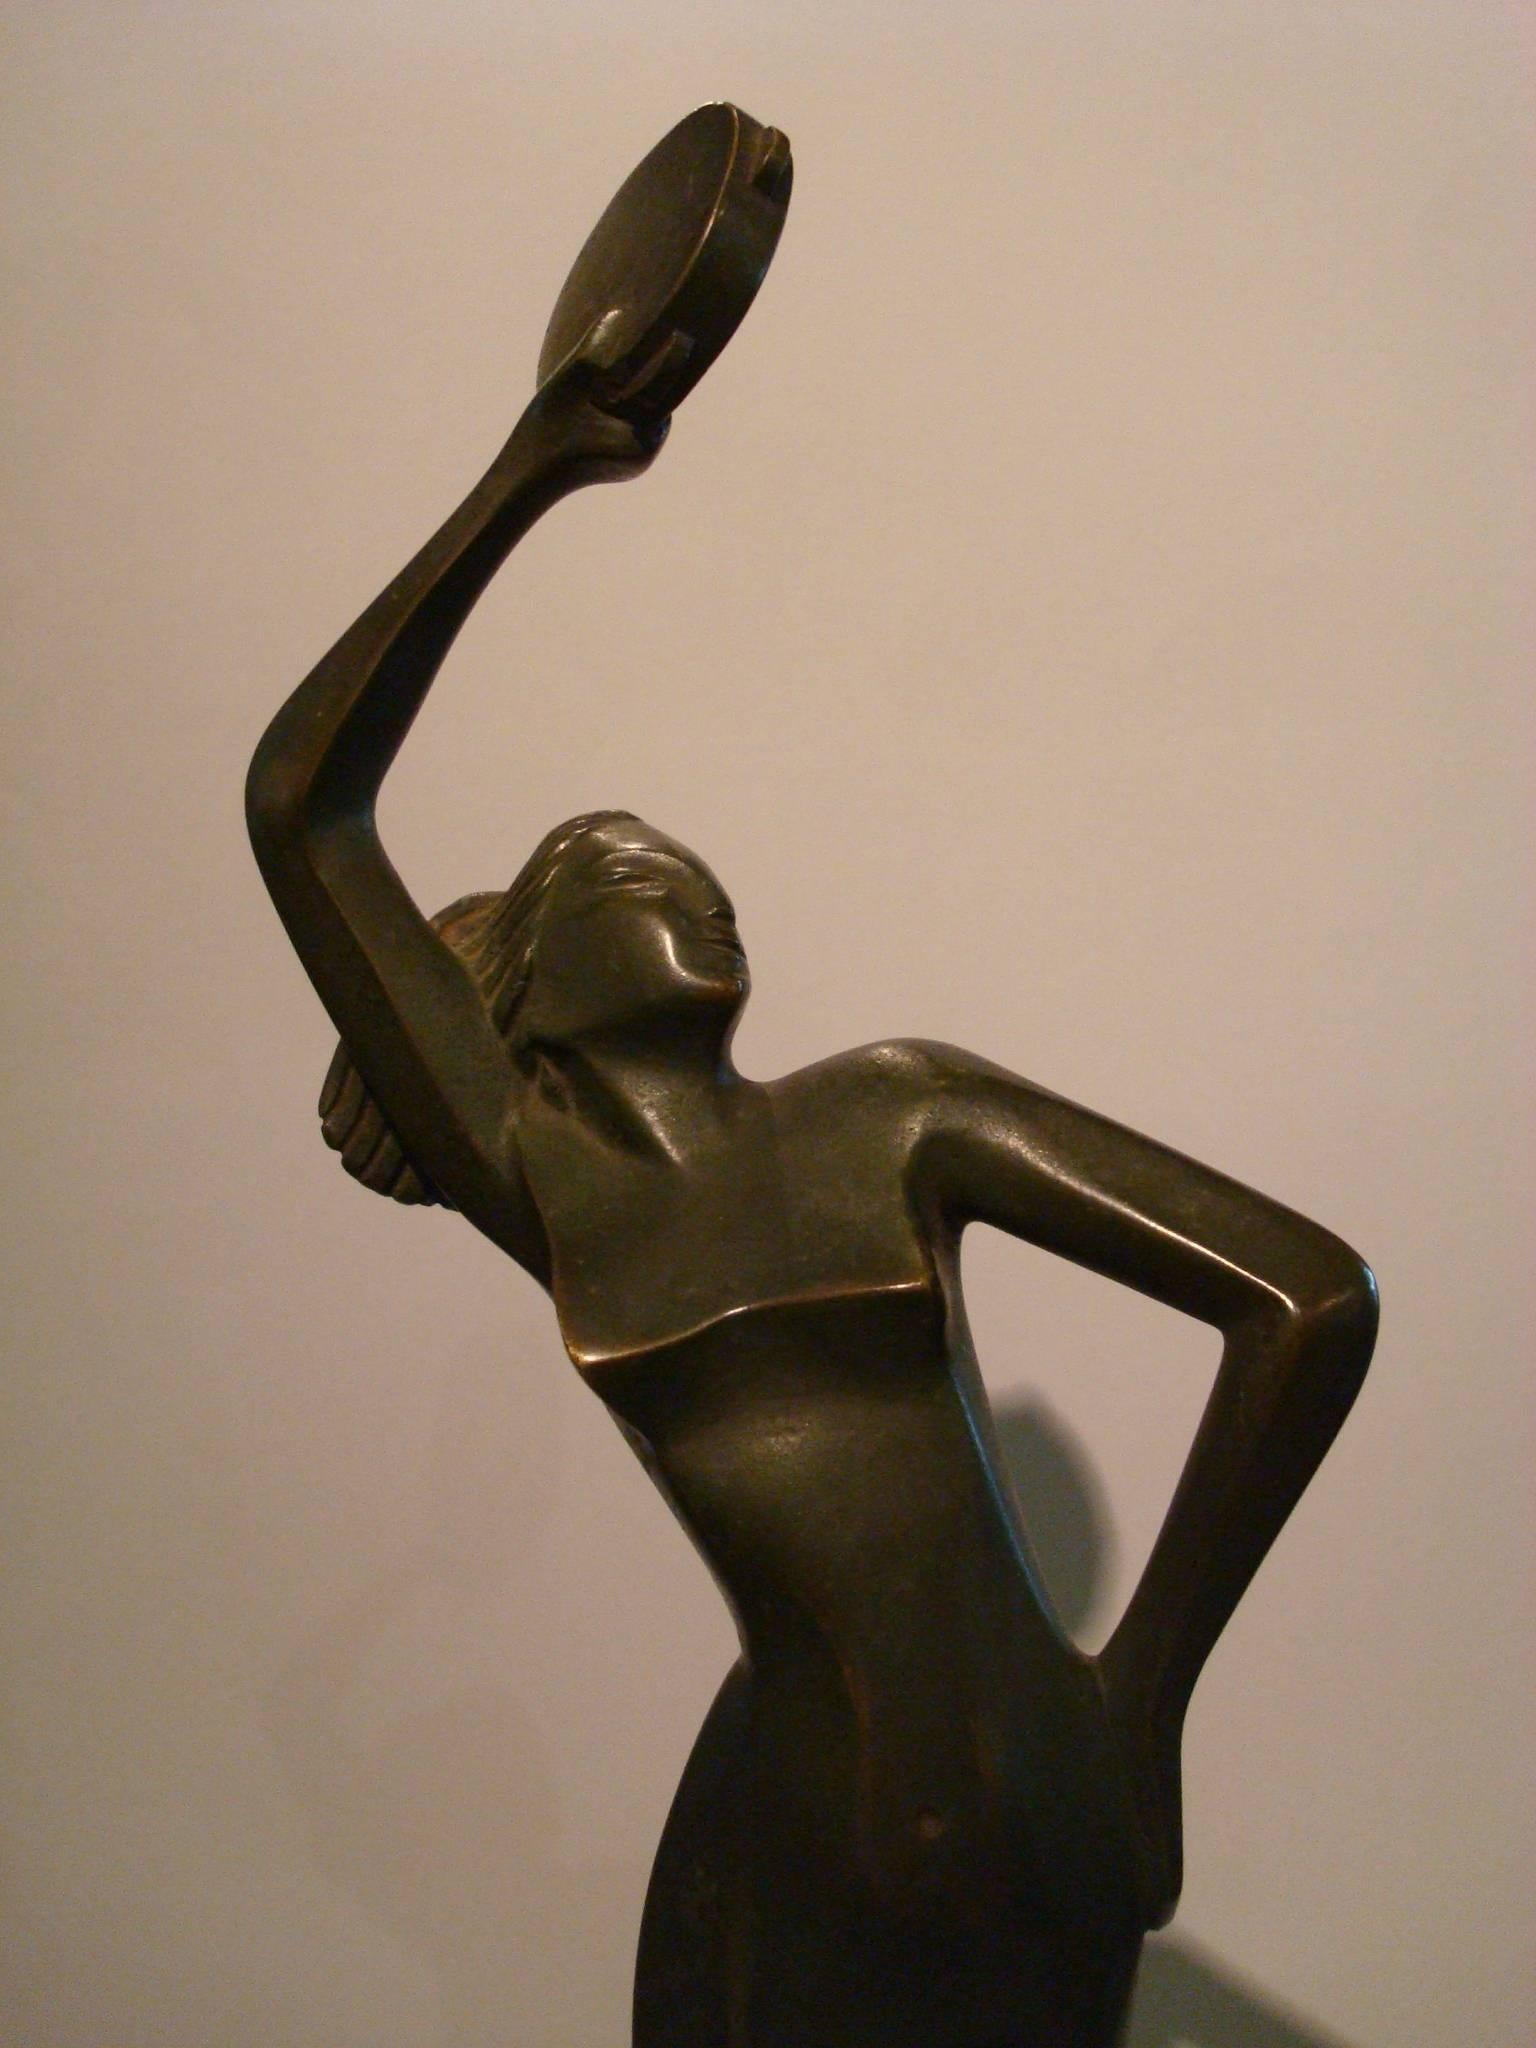 Art Deco Italian figure of a woman dancig with a music  instrument. 
Sculpture of a dancing nude girl. Bronze with a dark green patina.
Mounted over a marble base.